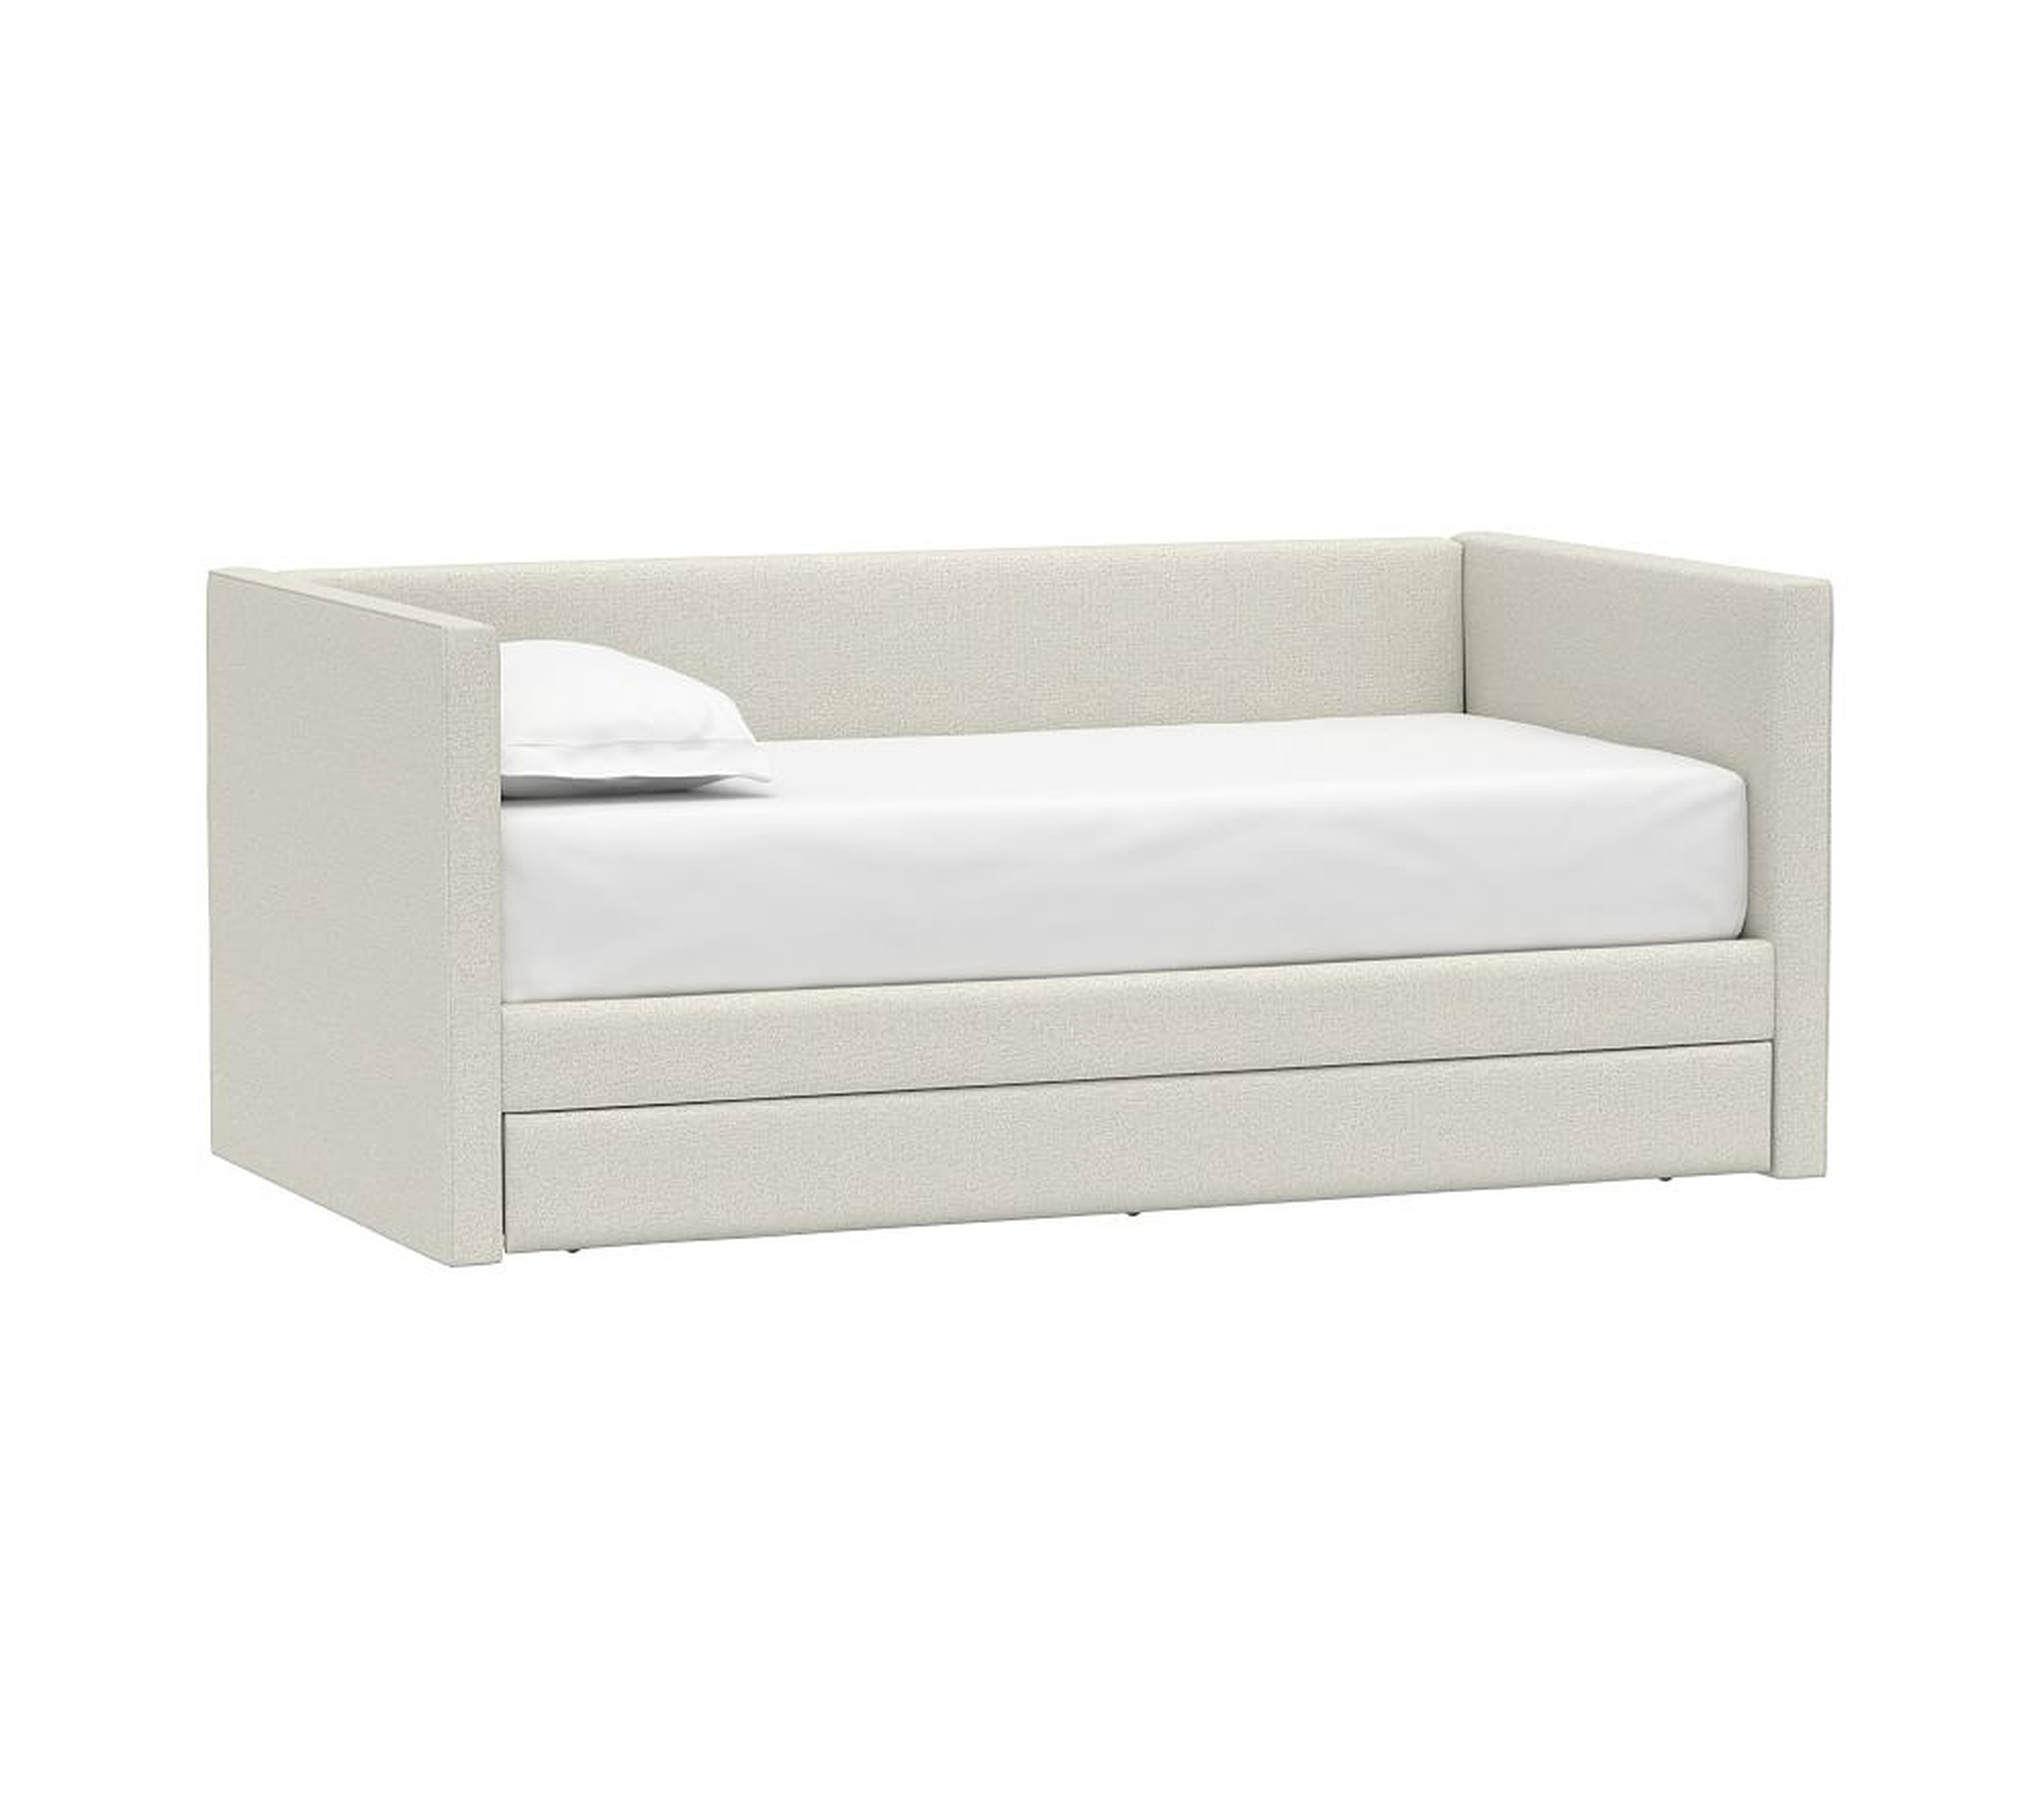 Carter Square Daybed Bed w/ Trundle, Twin, Performance Boucle, Oatmeal - Pottery Barn Kids